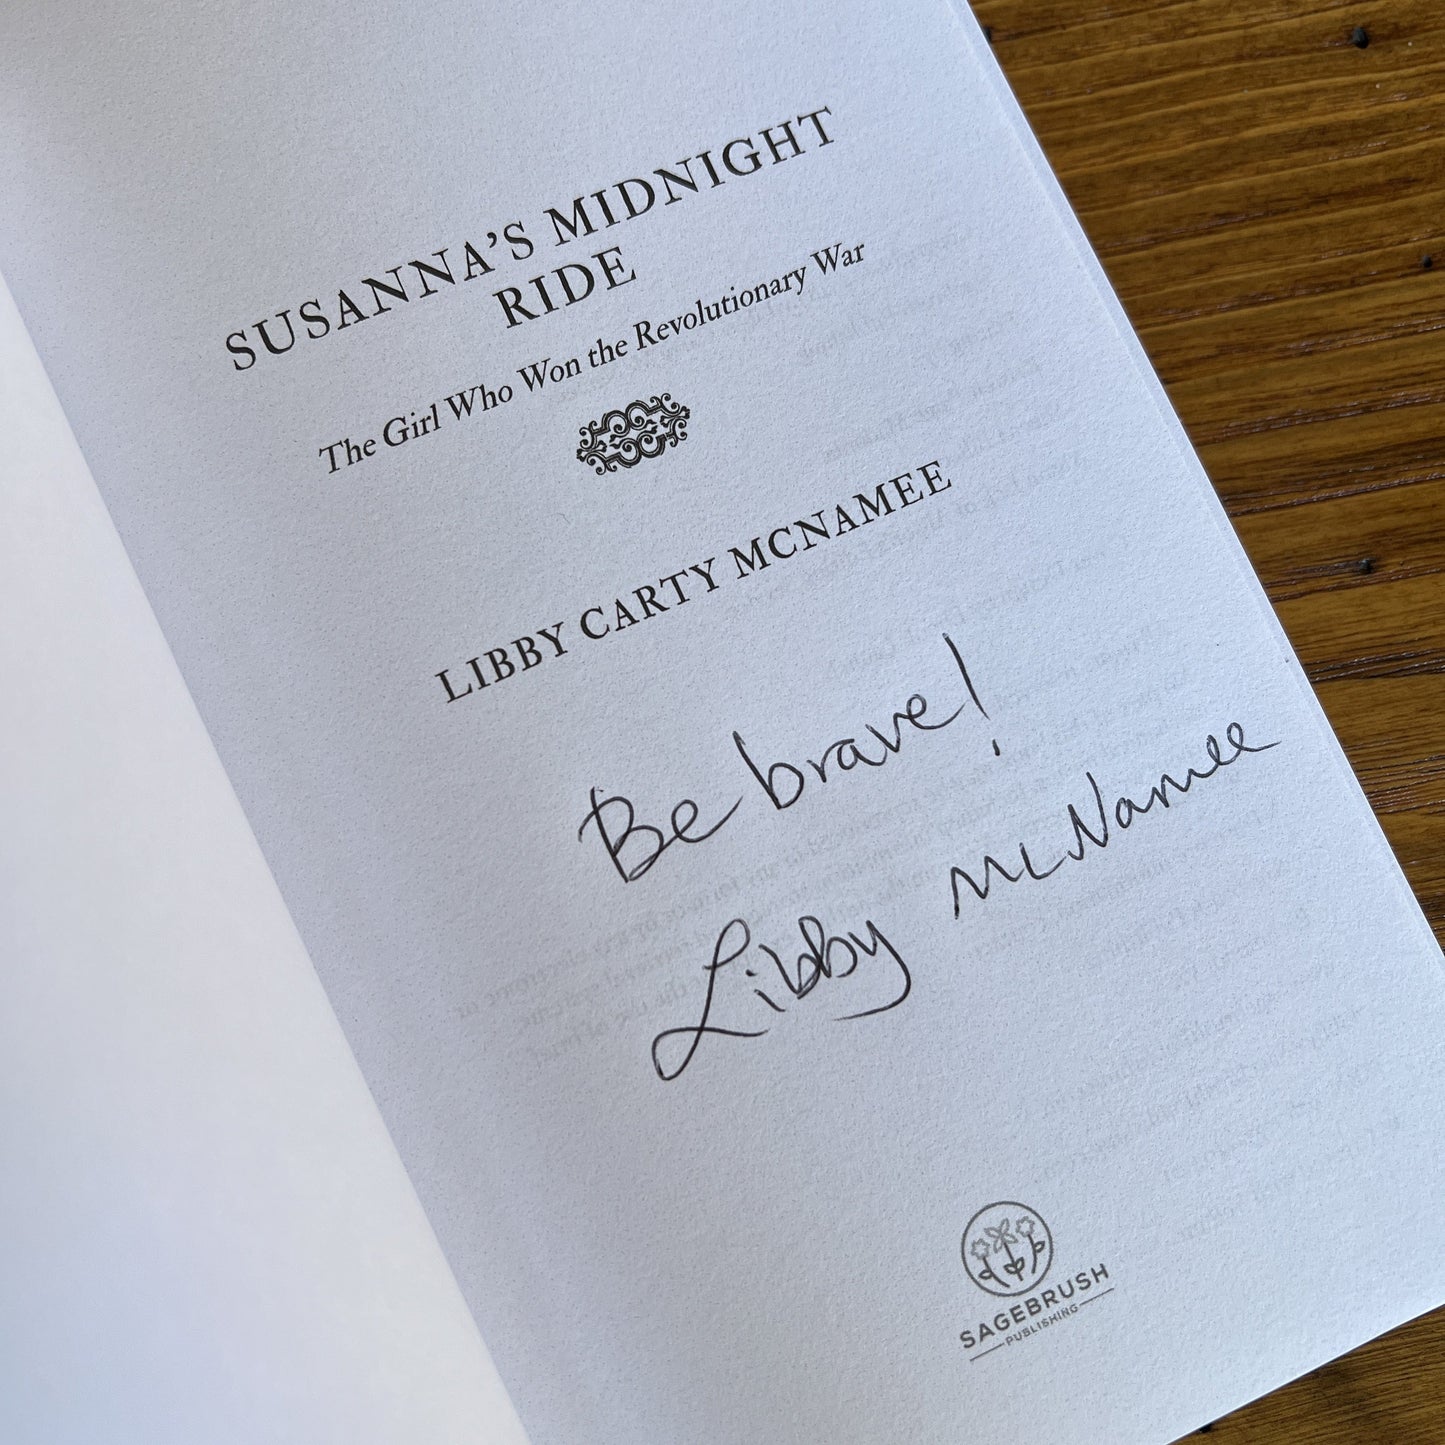 Signed by the Author "Susanna's Midnight Ride: The Girl Who Won the Revolutionary War" - by Libby Carty McNamee